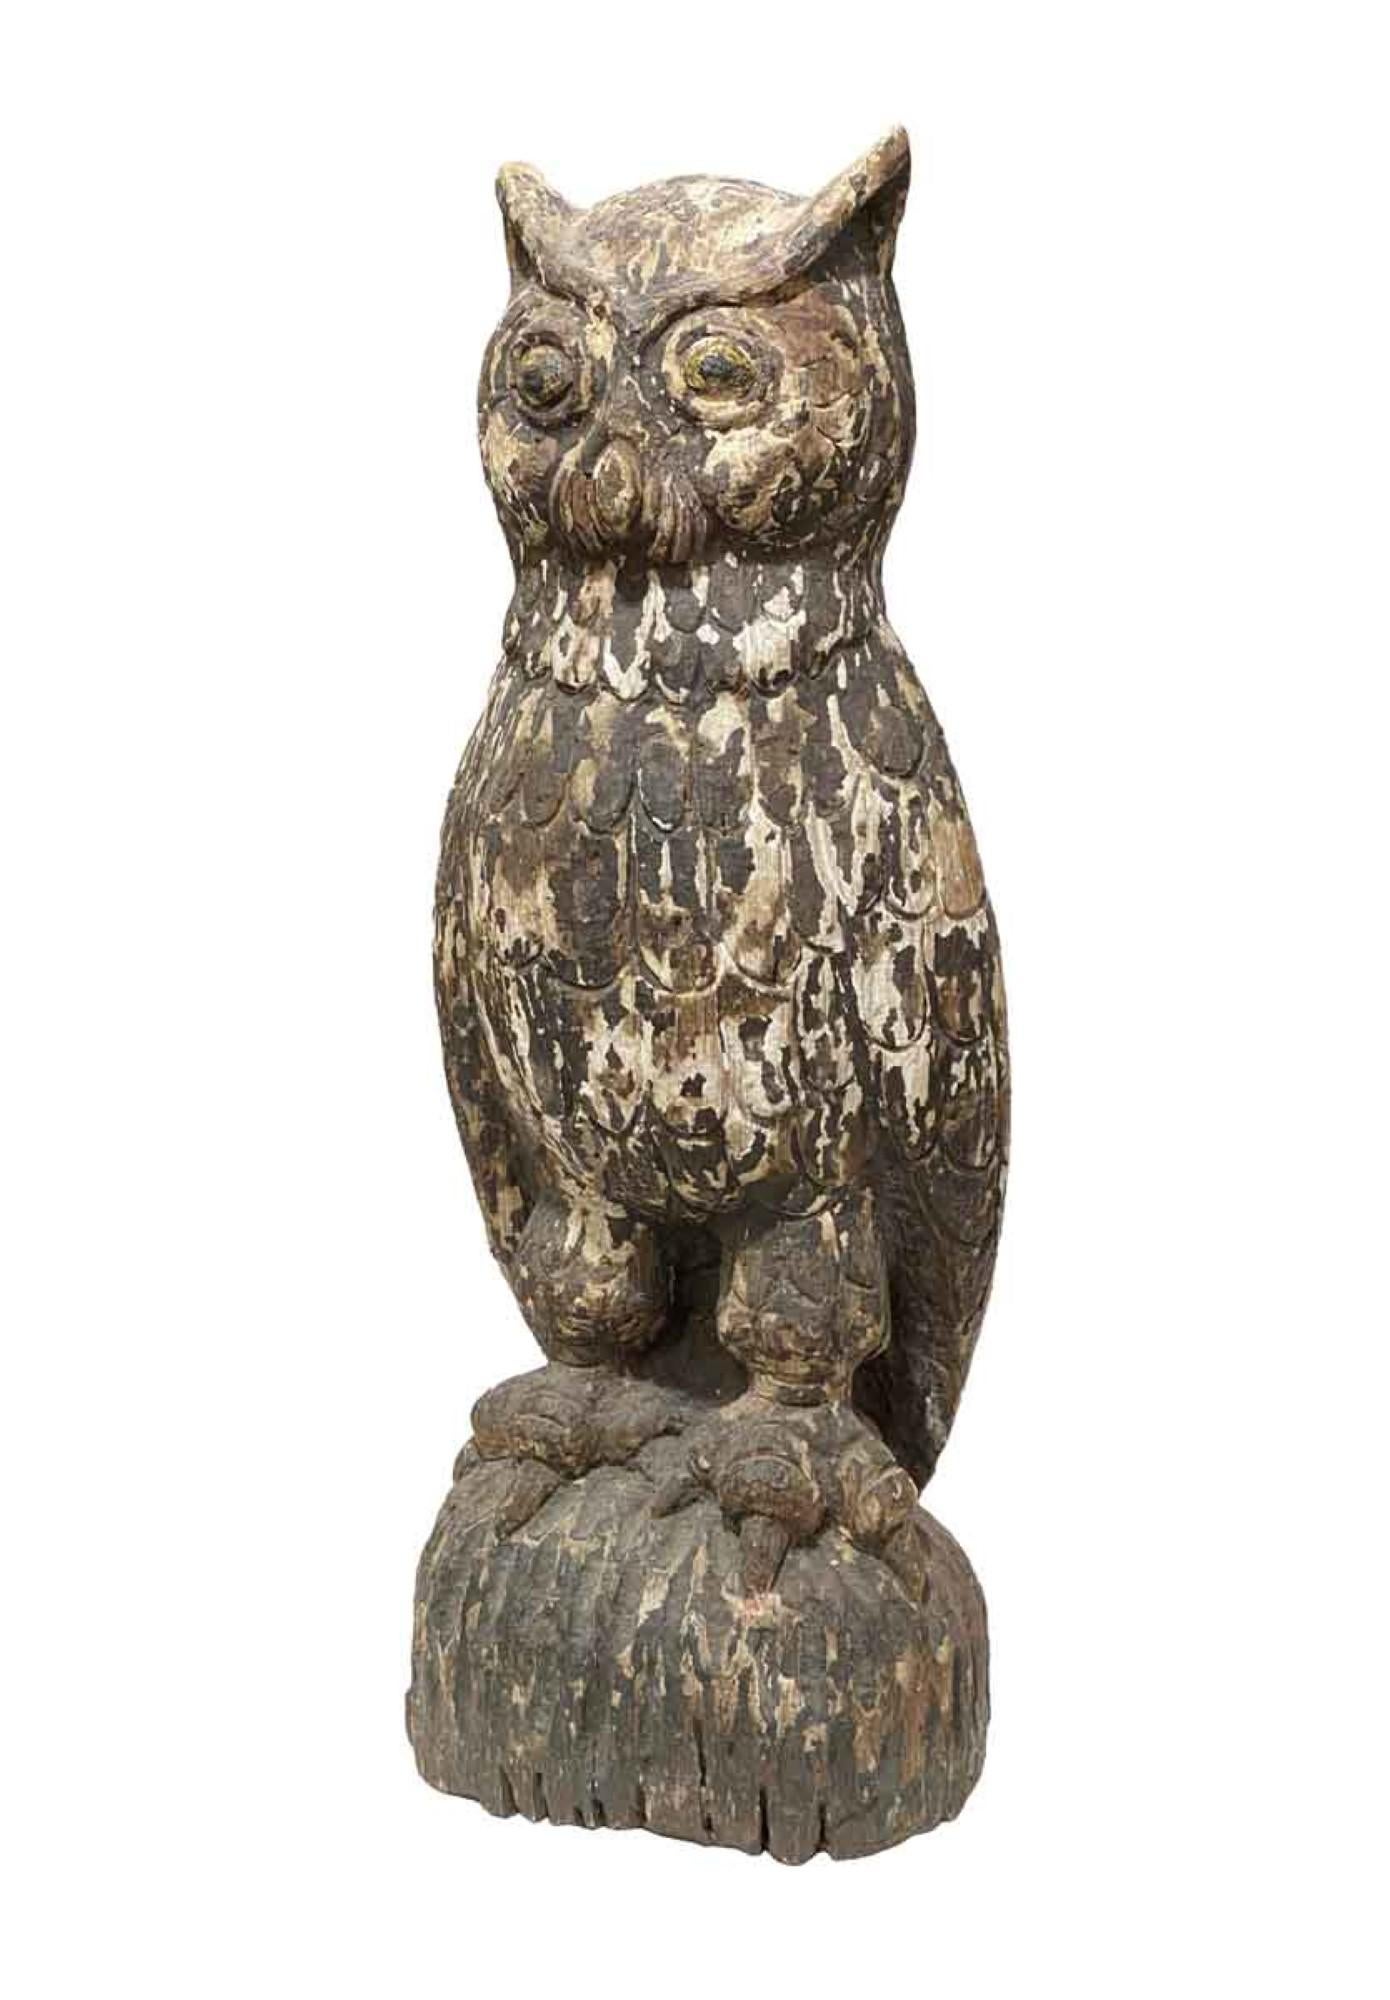 Large scale weathered hand carved wood owl statue with original patina. Done in a primitive style. Original Americana. This can be seen at our 333 West 52nd St location in the Theater District West of Manhattan.